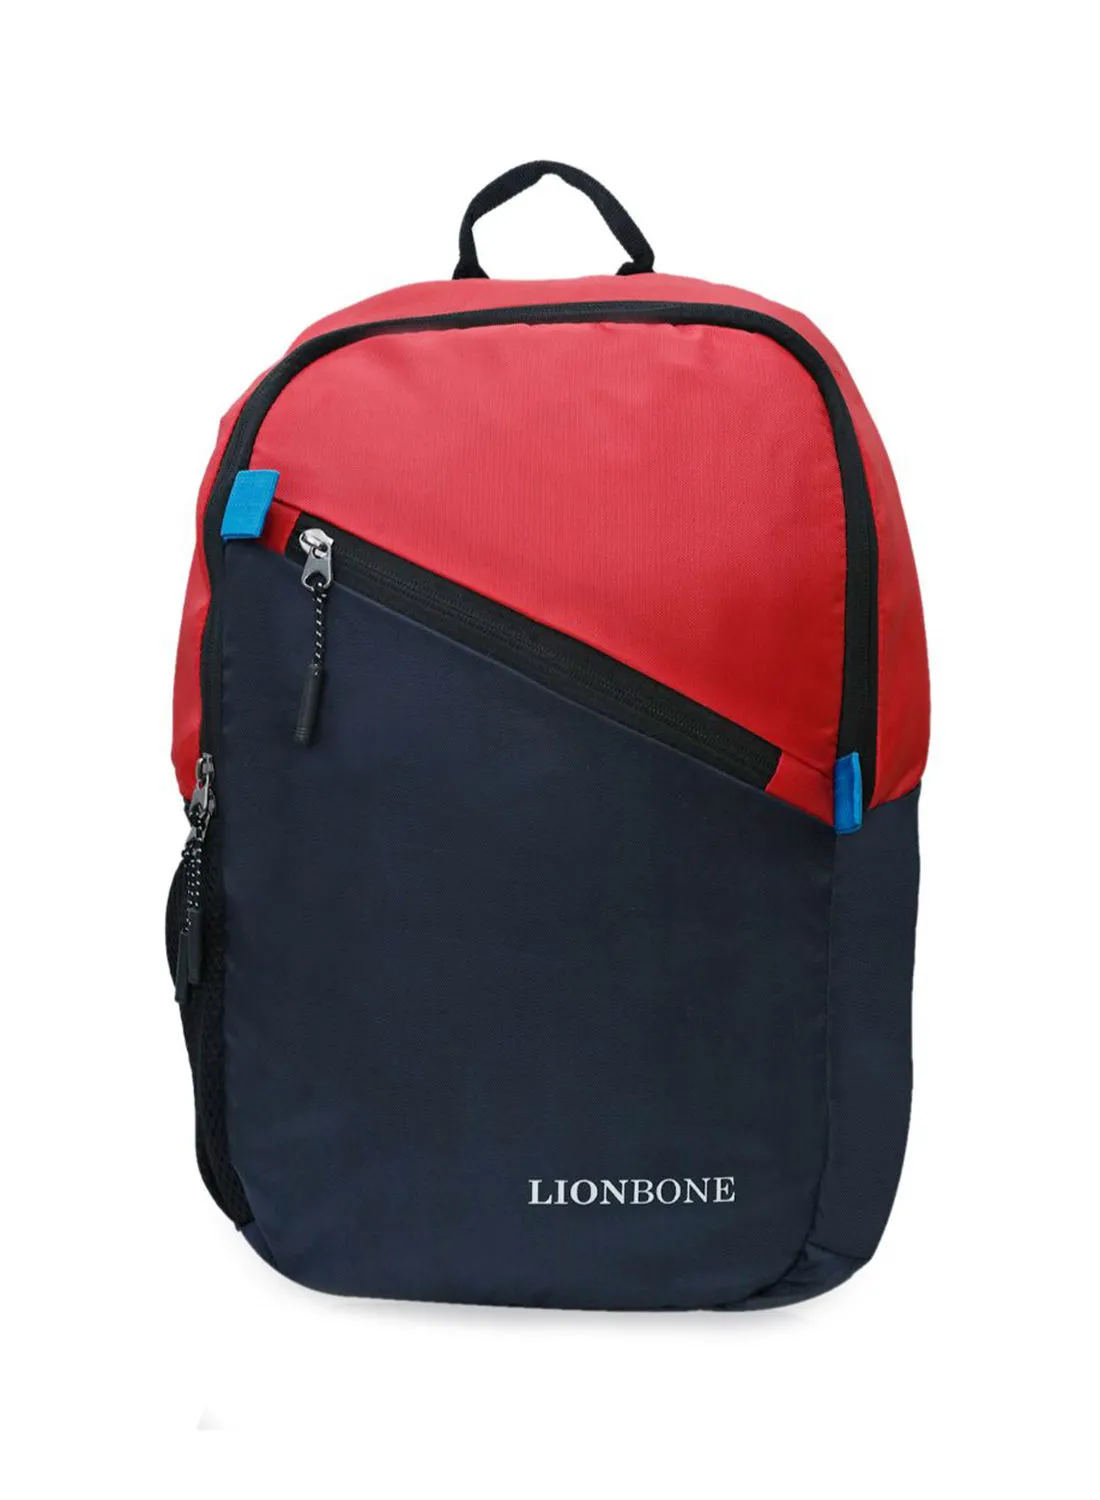 LIONBONE 22L Water Resistant Unisex Polyester Laptop Backpack with Zip closure compatible with 13' Laptop Red/Navy